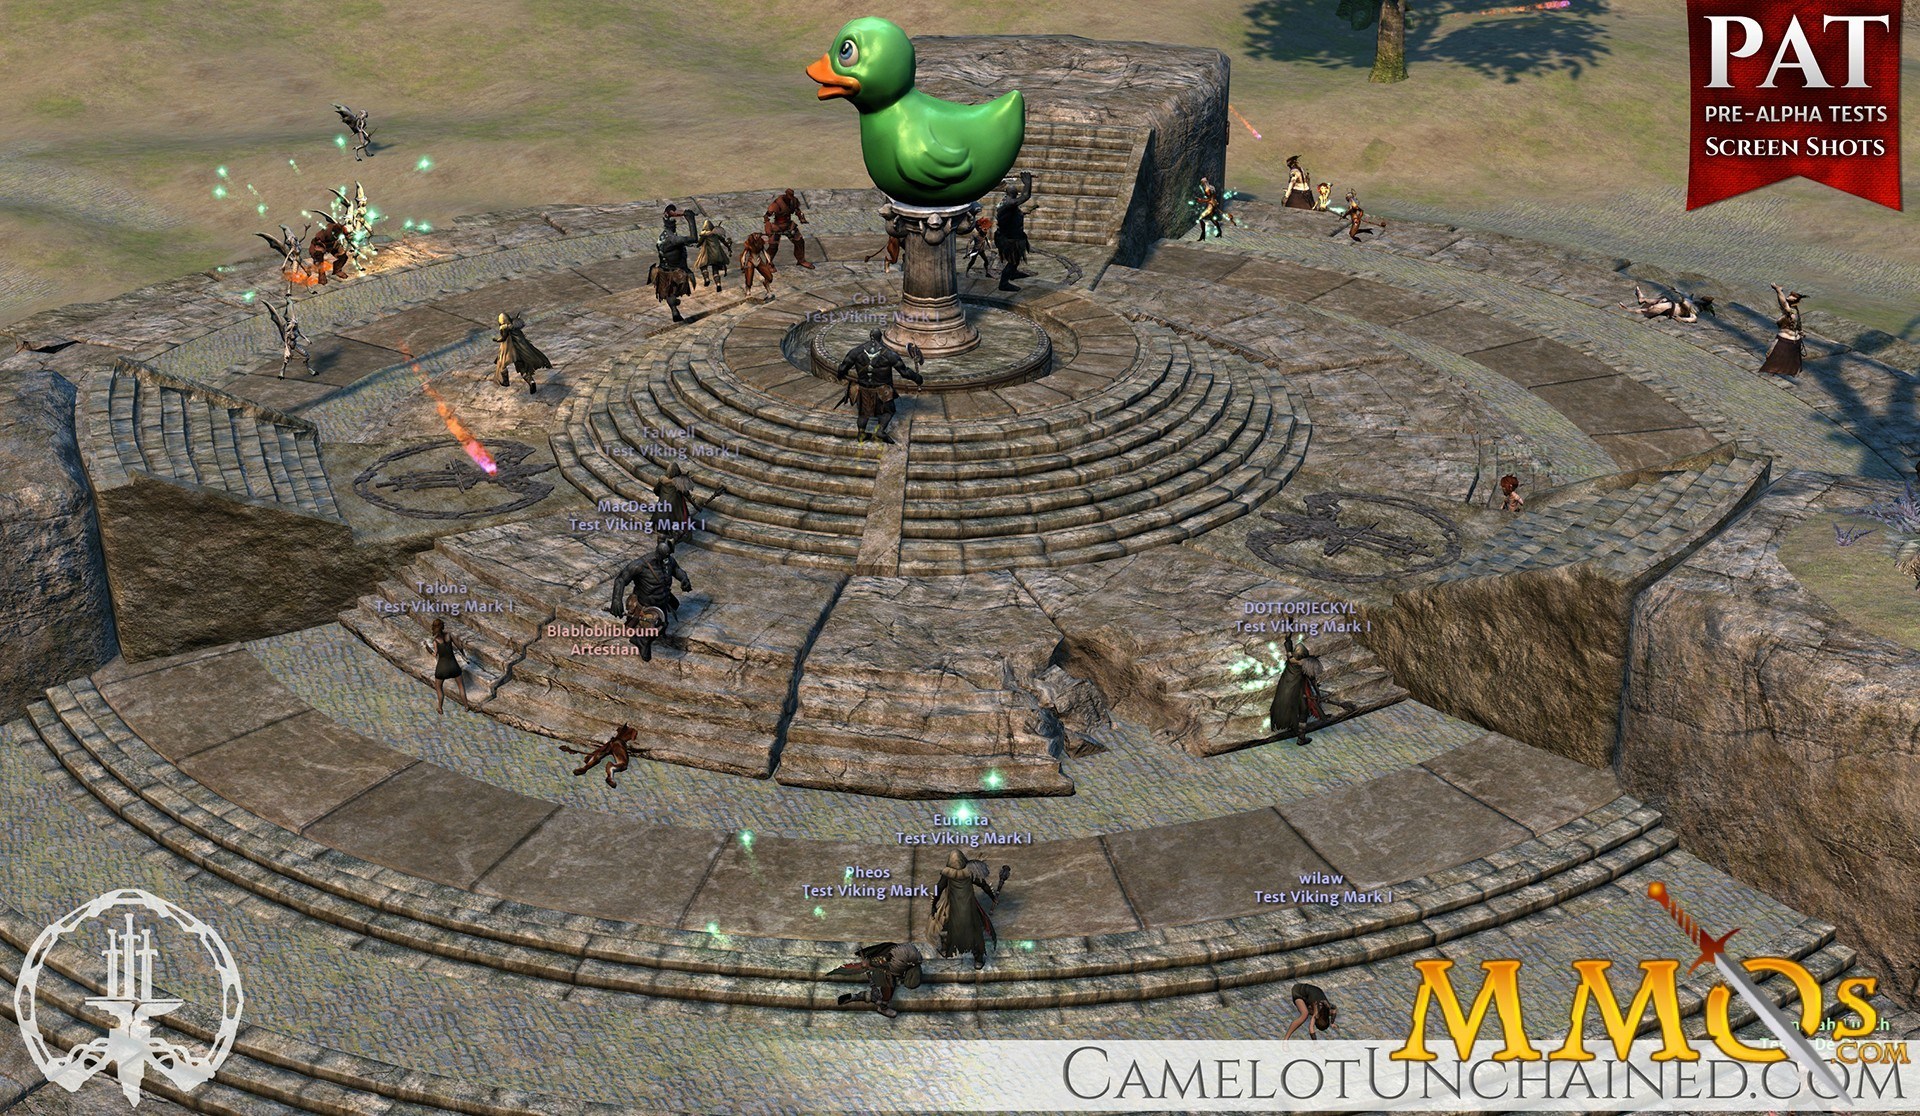 camelot unchained pay for open beta